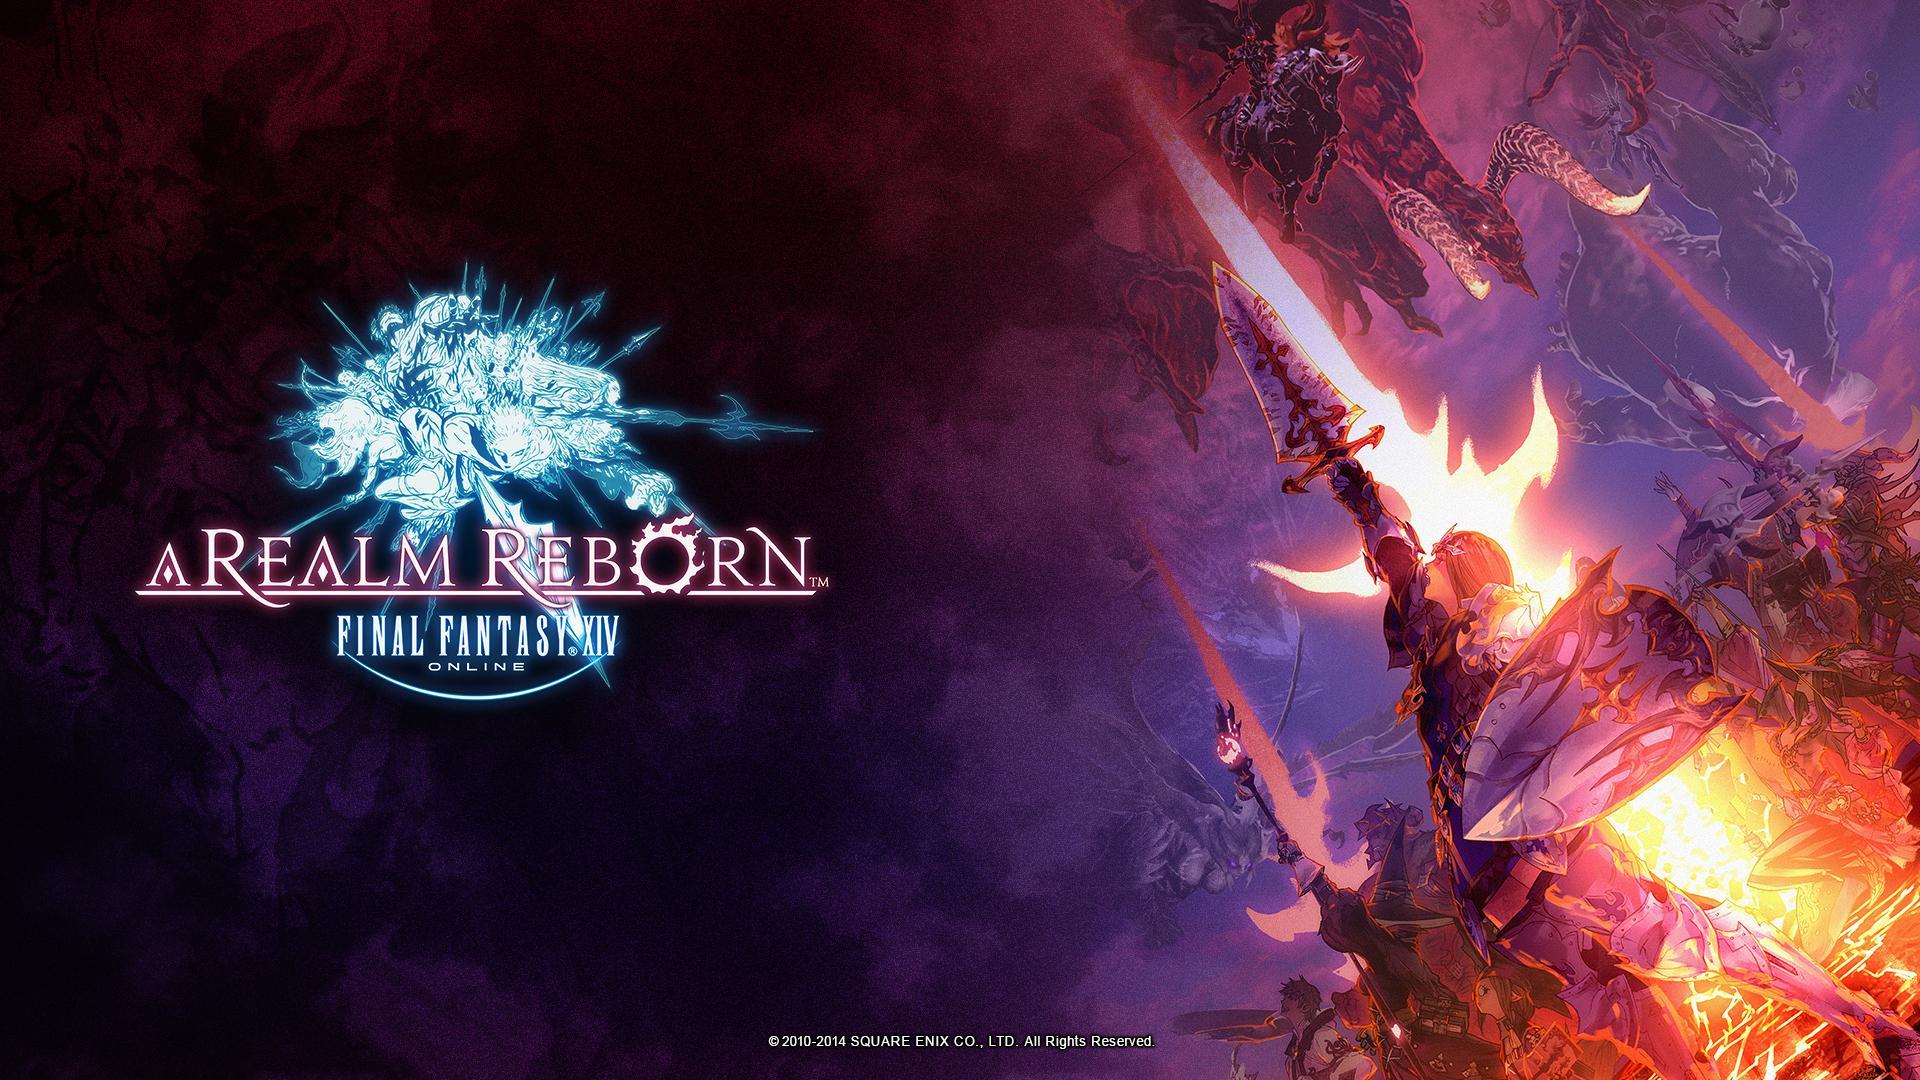 New Final Fantasy XIV: A Realm Reborn Illustrations Make for Perfect